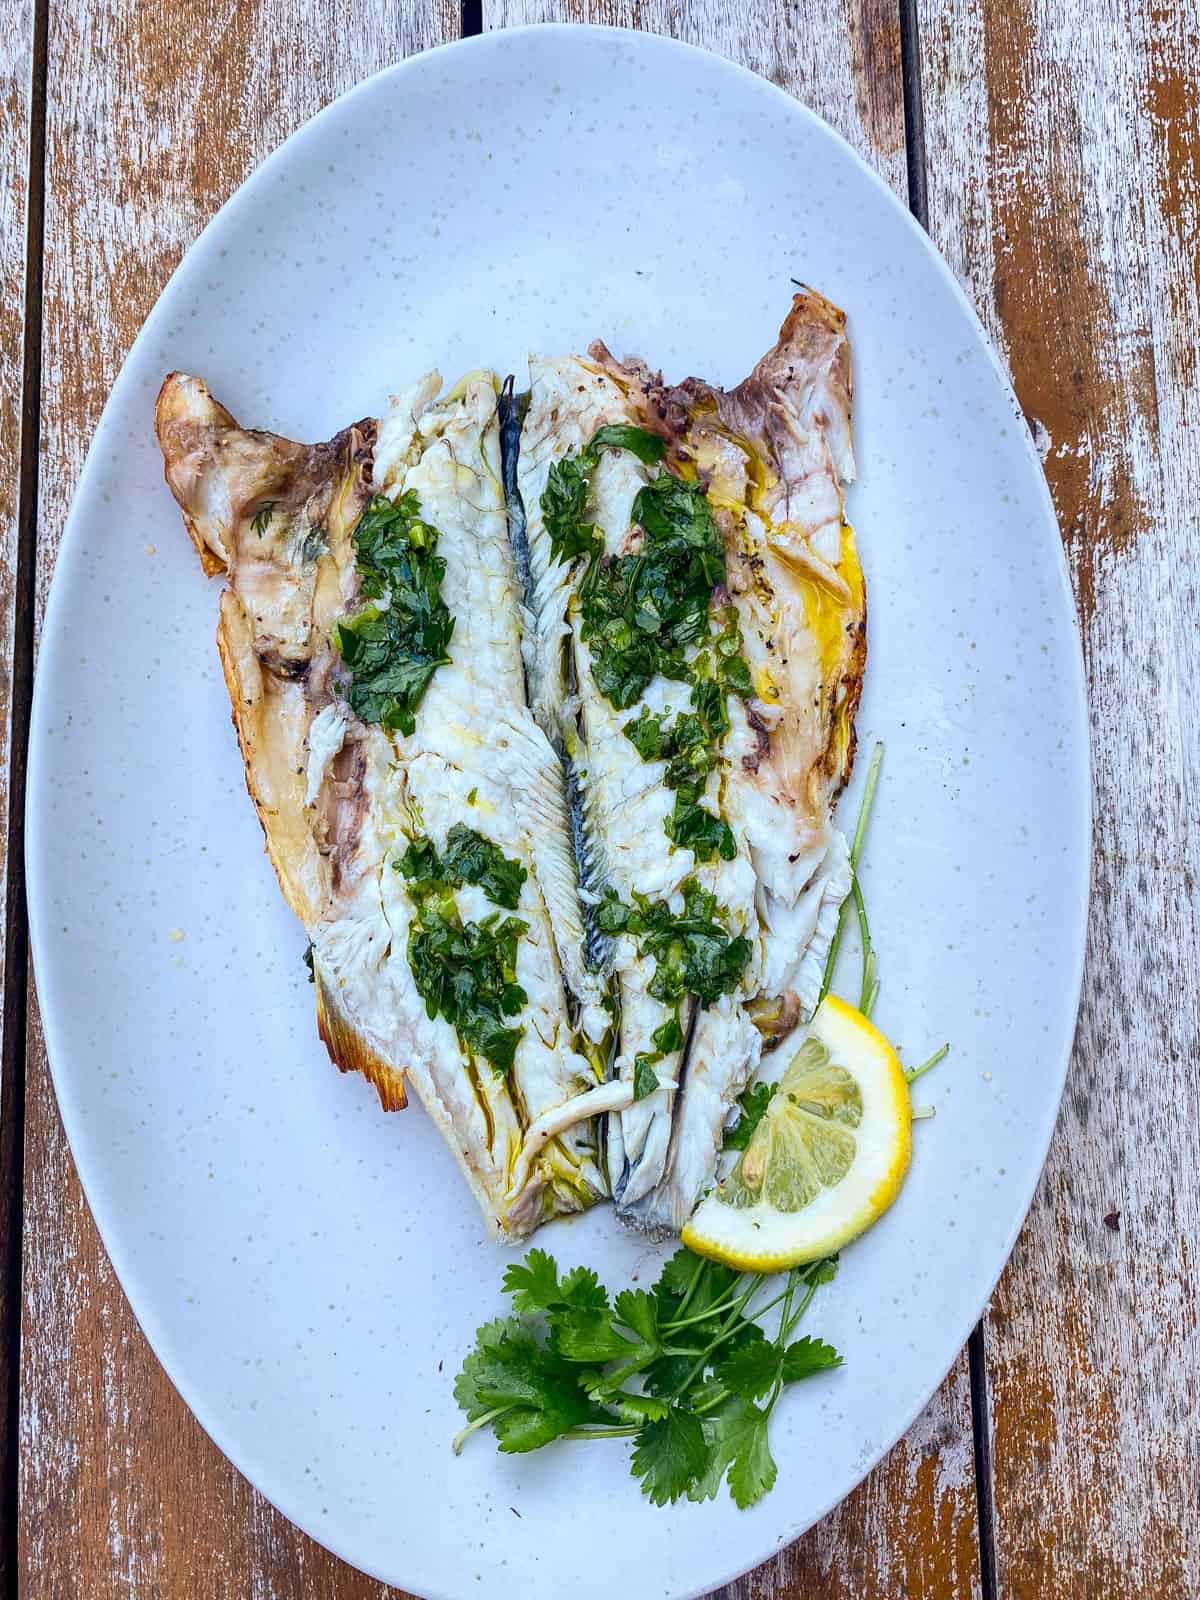 Grilled branzino with herb oil on top.